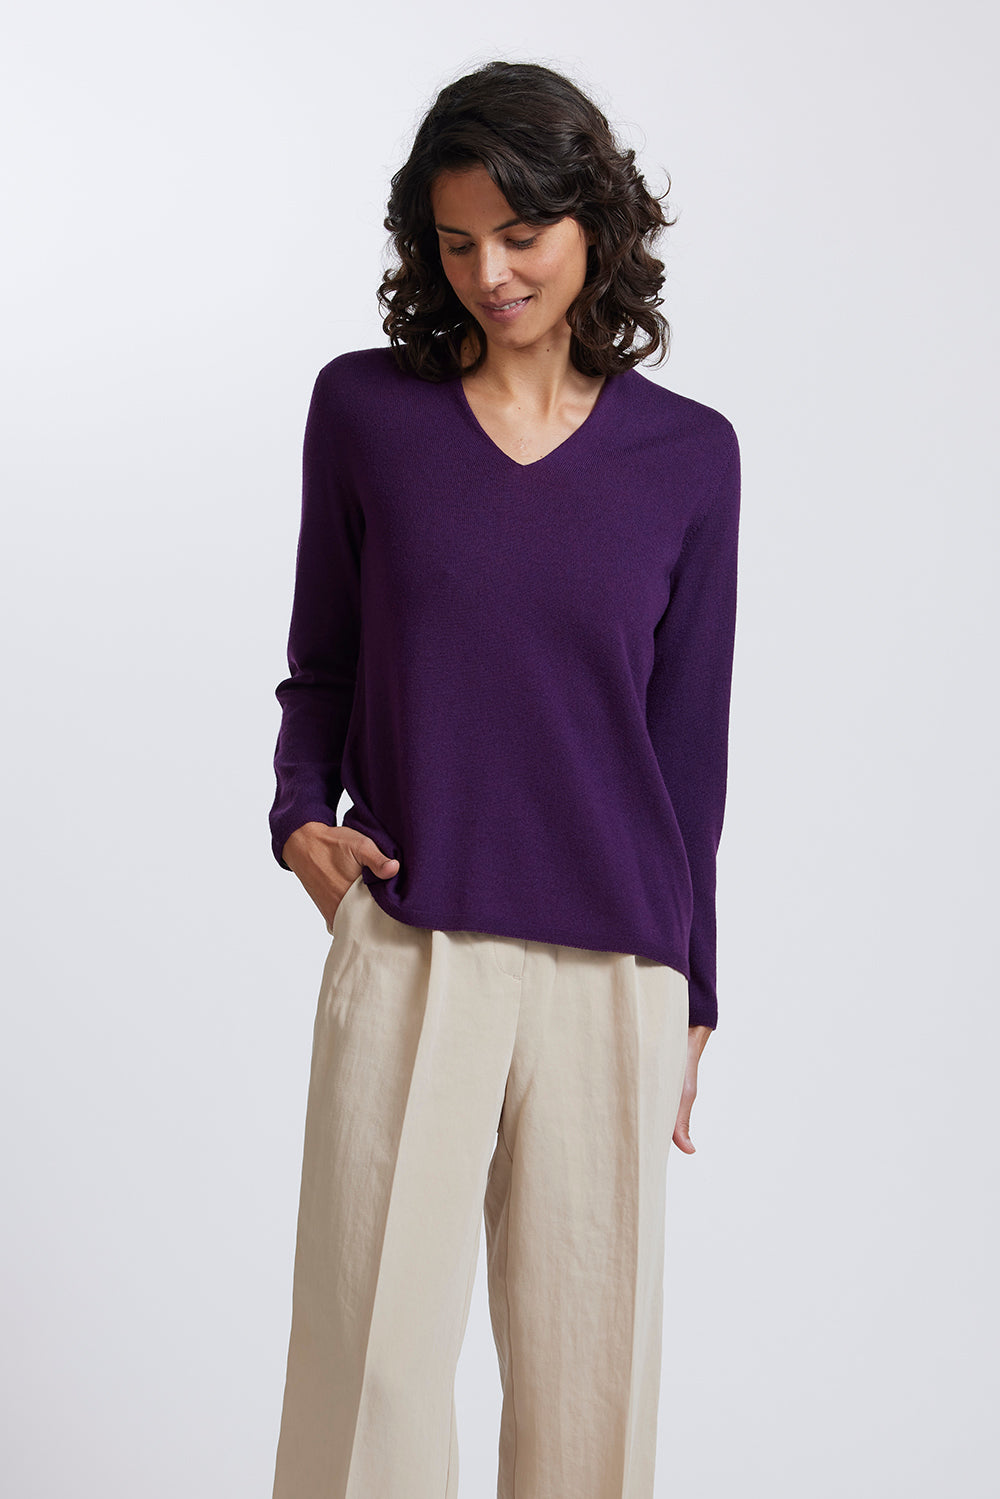 Classic High V Sweater in Plum by Royal Merino